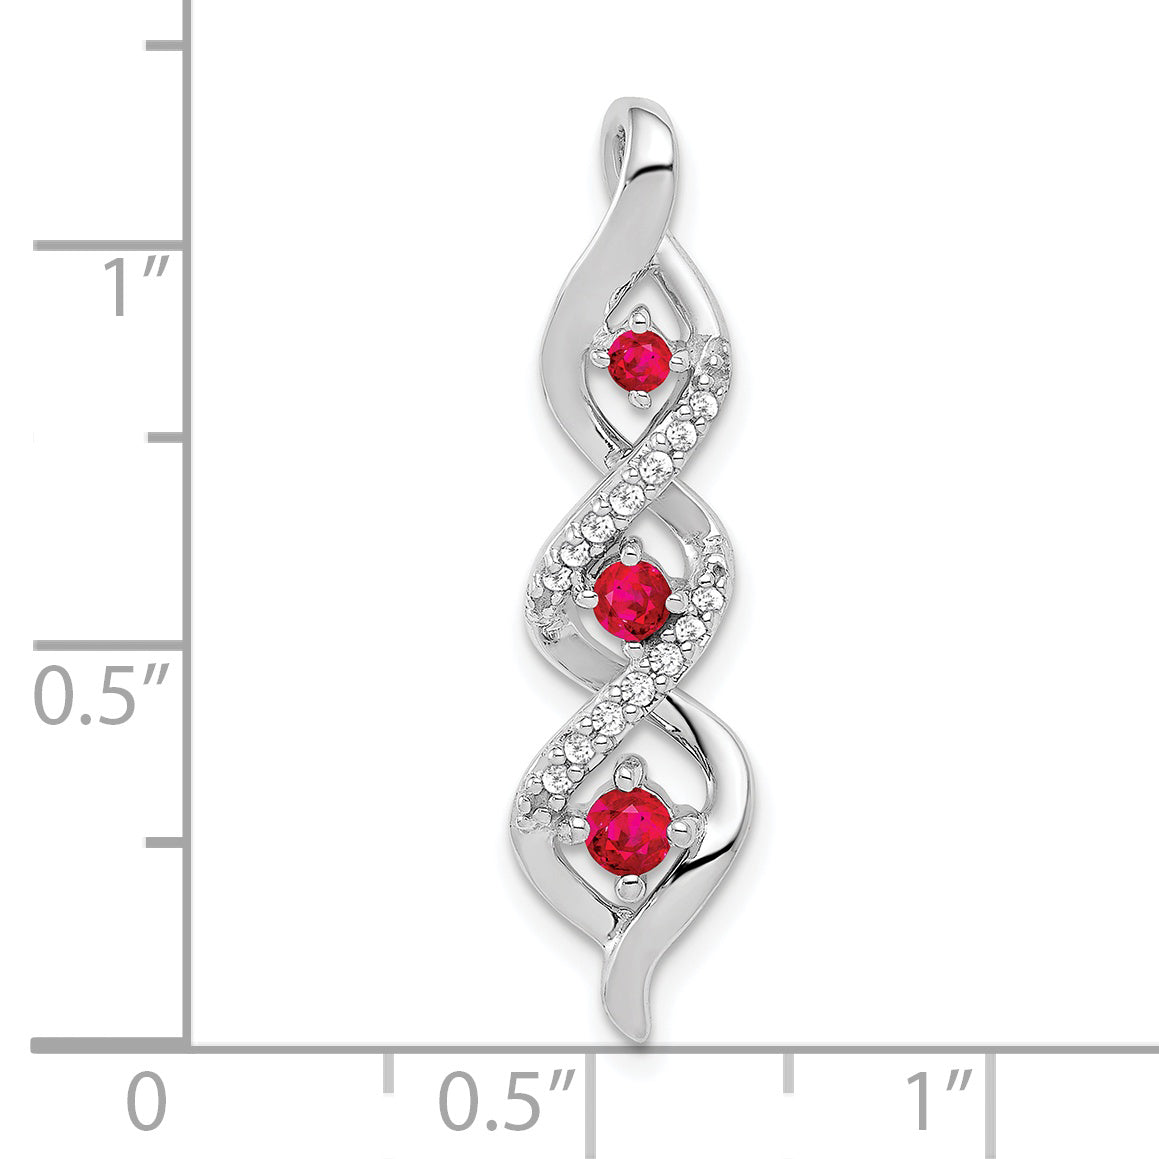 10k White Gold Diamond and .25 Ruby Twisted 3-stone Chain Slide